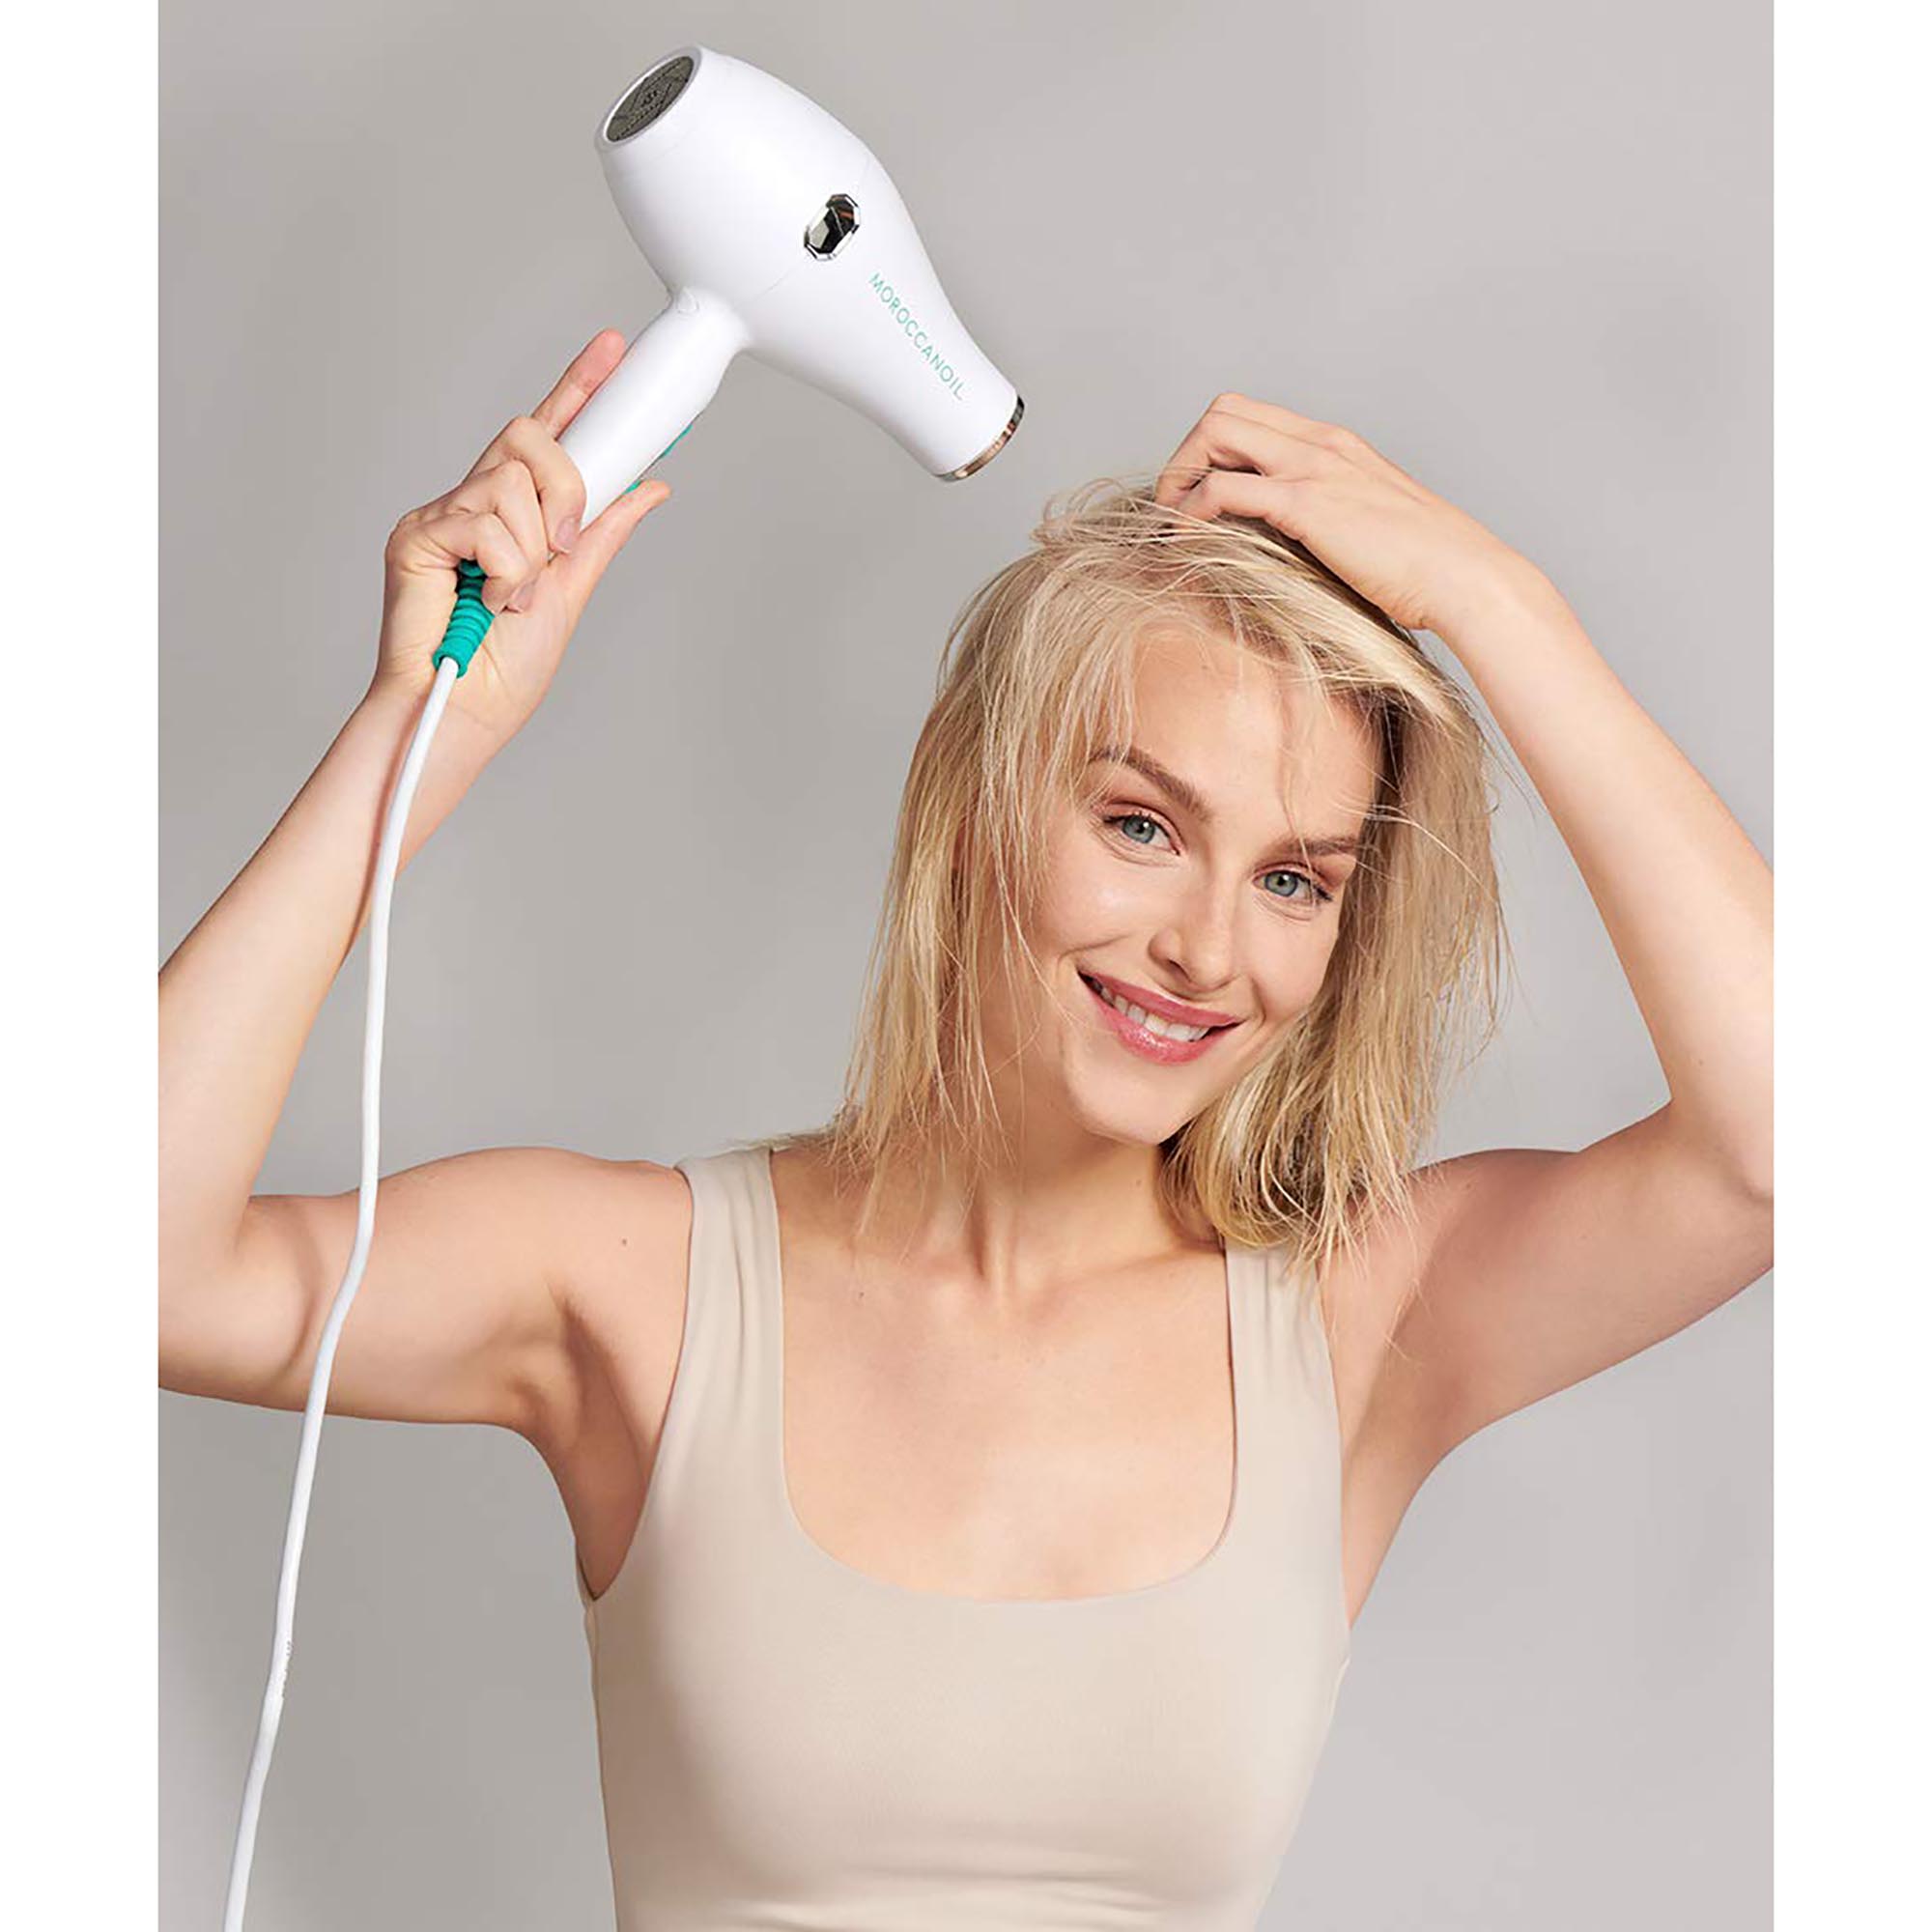 Moroccan Oil Smart Styling Infrared Hair Dryer